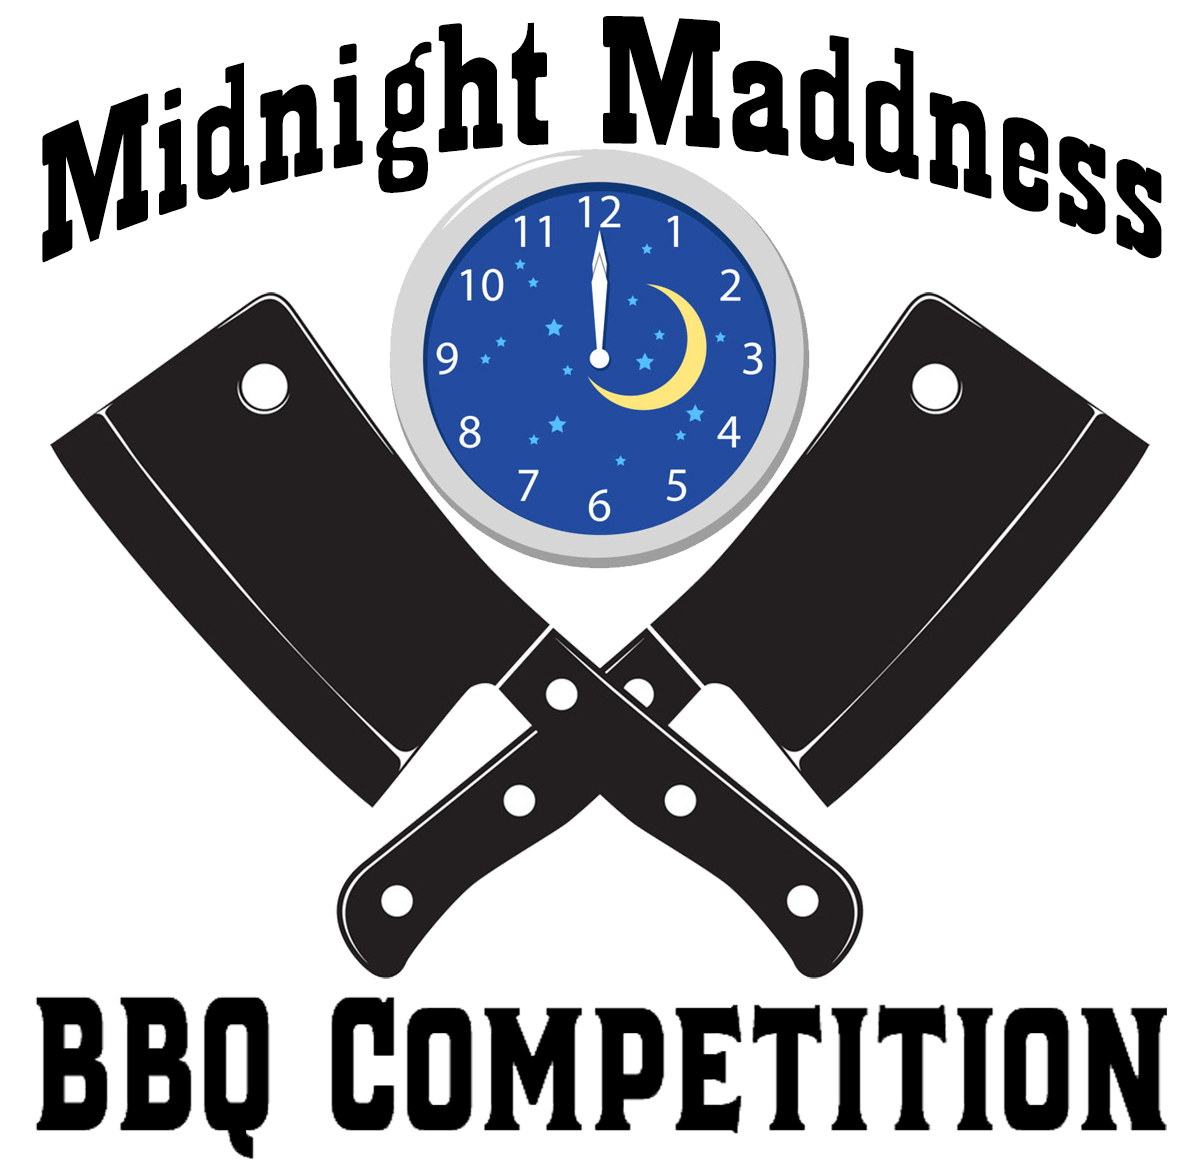 Midnight Madness BBQ Competition